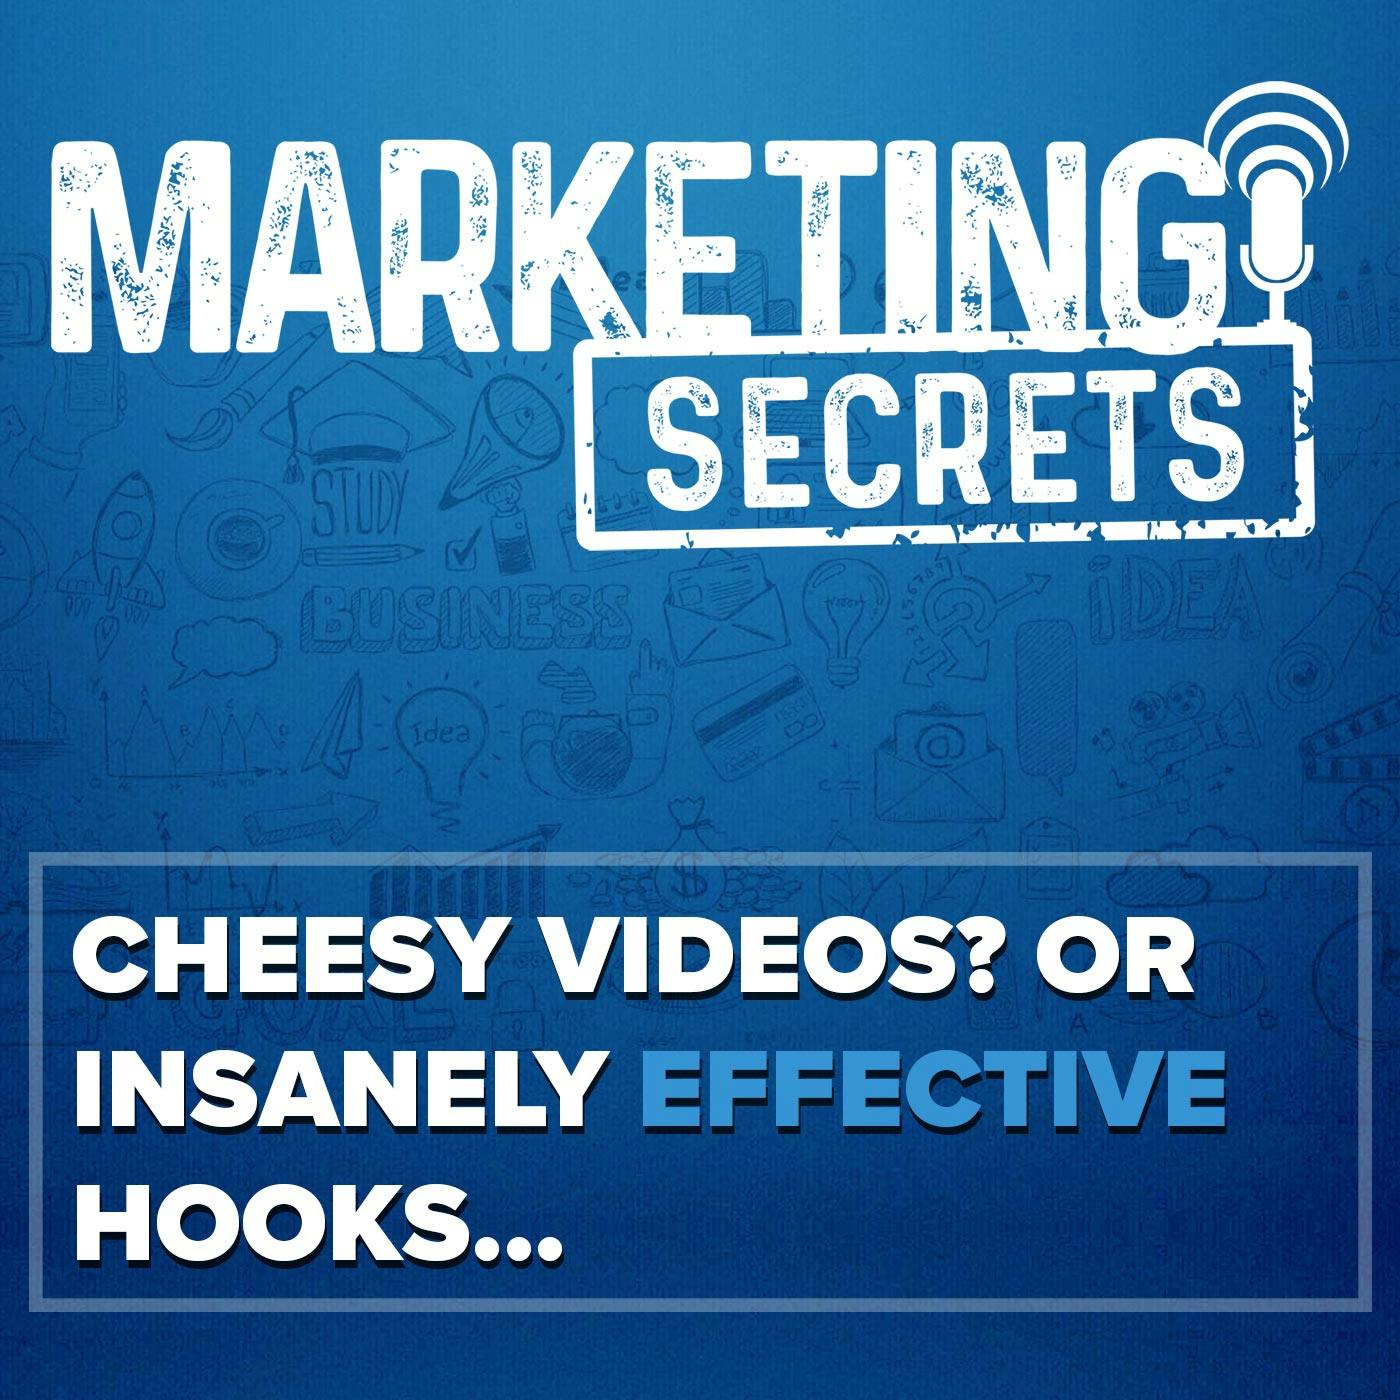 Cheesy Videos? Or Insanely Effective Hooks...